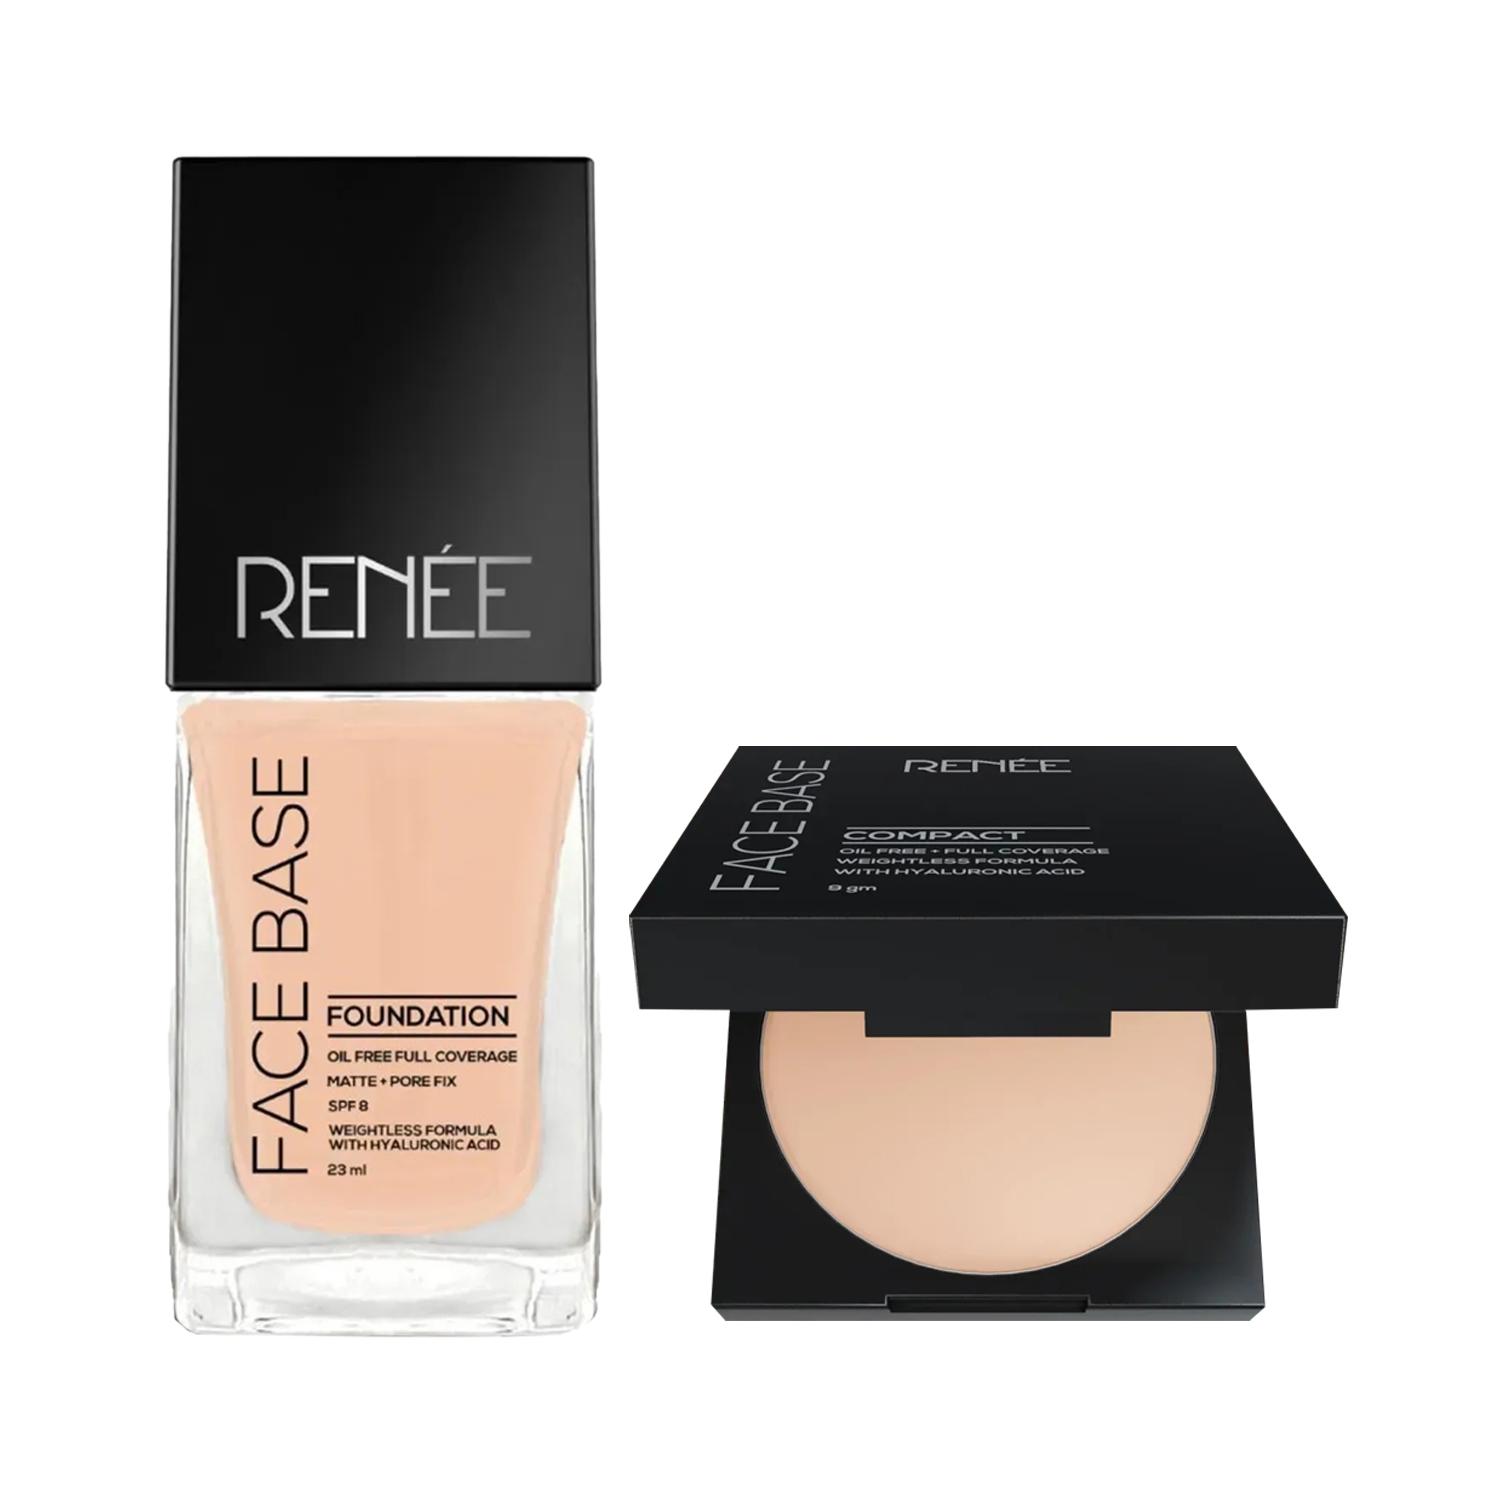 RENEE | RENEE Pure Perfection Makeup Duo Combo - Foundation + Compact